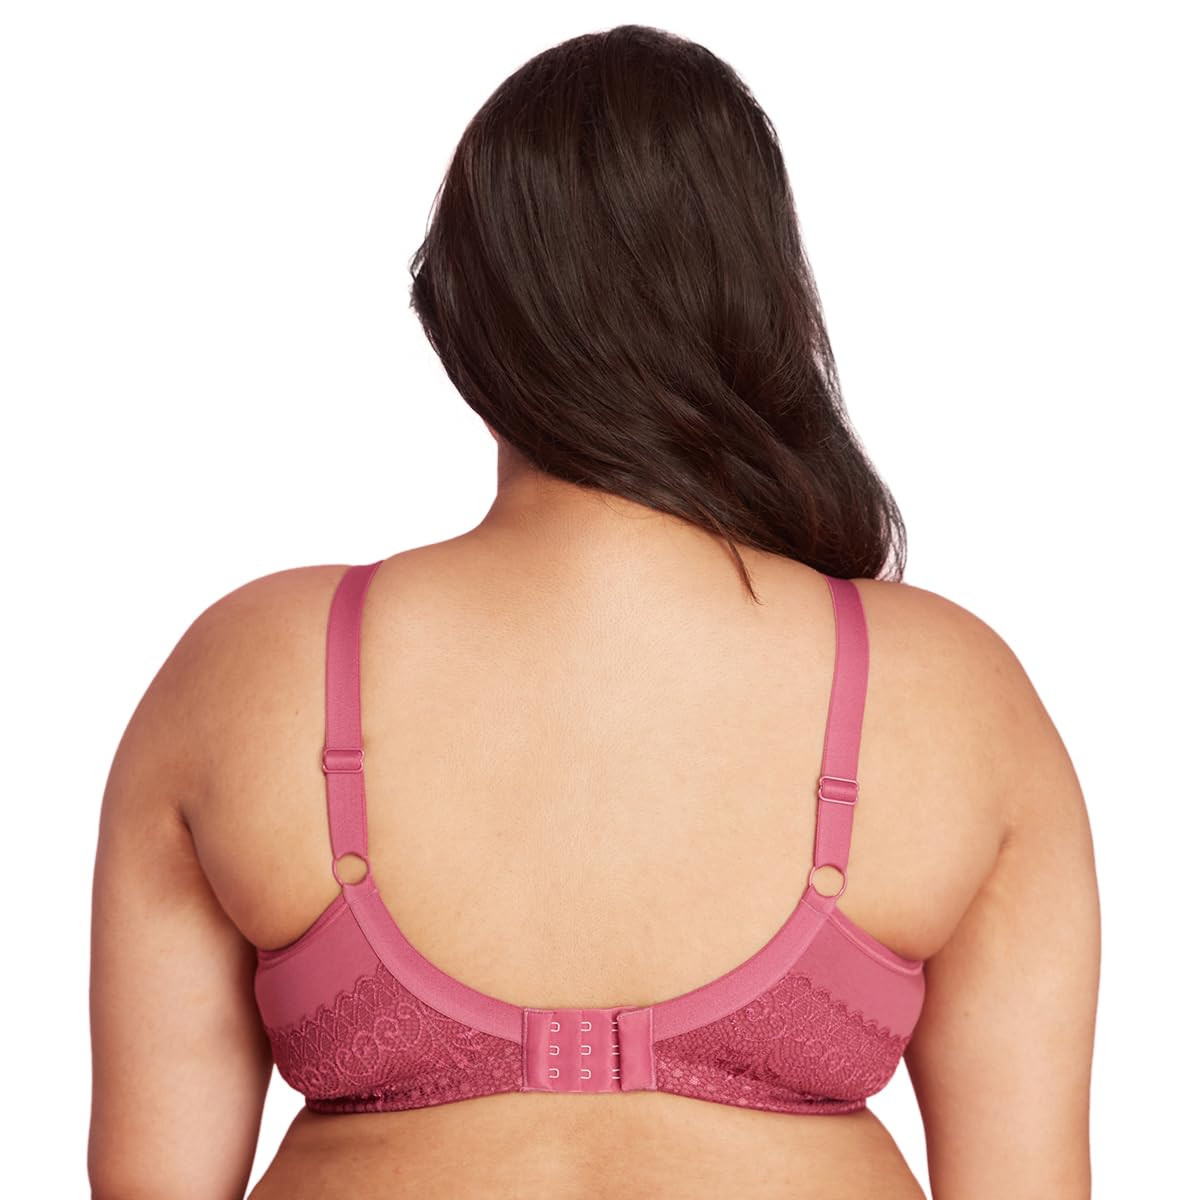 https://www.fastemi.com/uploads/fastemicom/products/nykd-by-nykaa-womens-full-support-m-frame-heavy-bust-everyday-cotton-bra--non-padded--wireless--full-coverage-minimizer-bra-nyb101-pink-36c-1nsize-36c-240746953031509_l.jpg